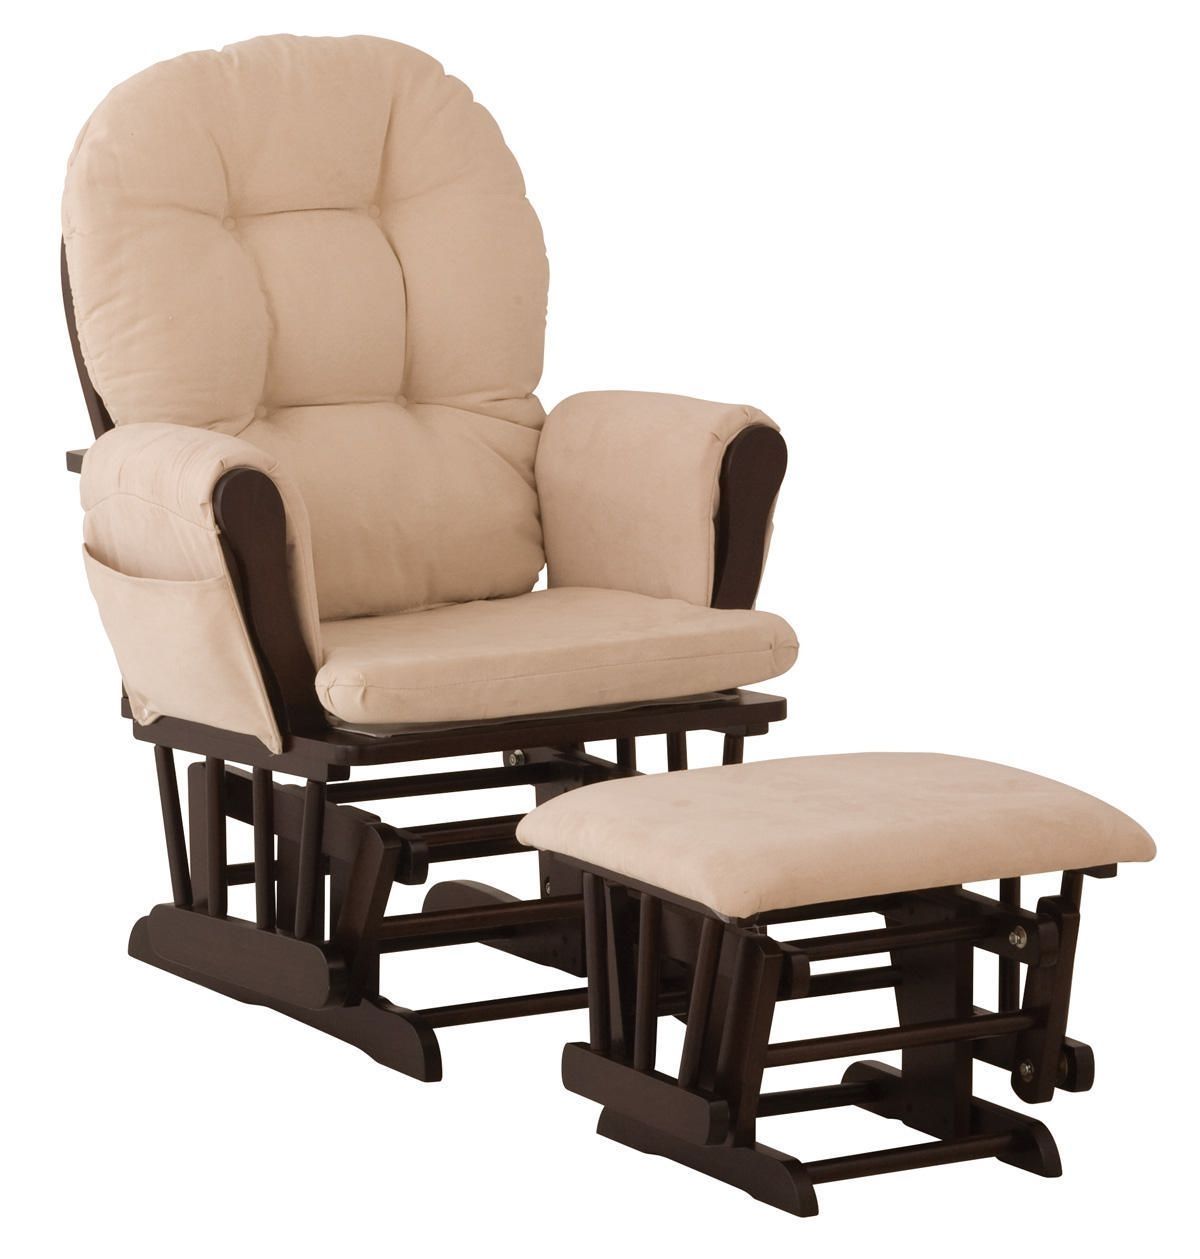 Baby Rocking Chair Walmart – Home – Furniture Ideas With Rocking Chairs At Walmart (View 12 of 15)